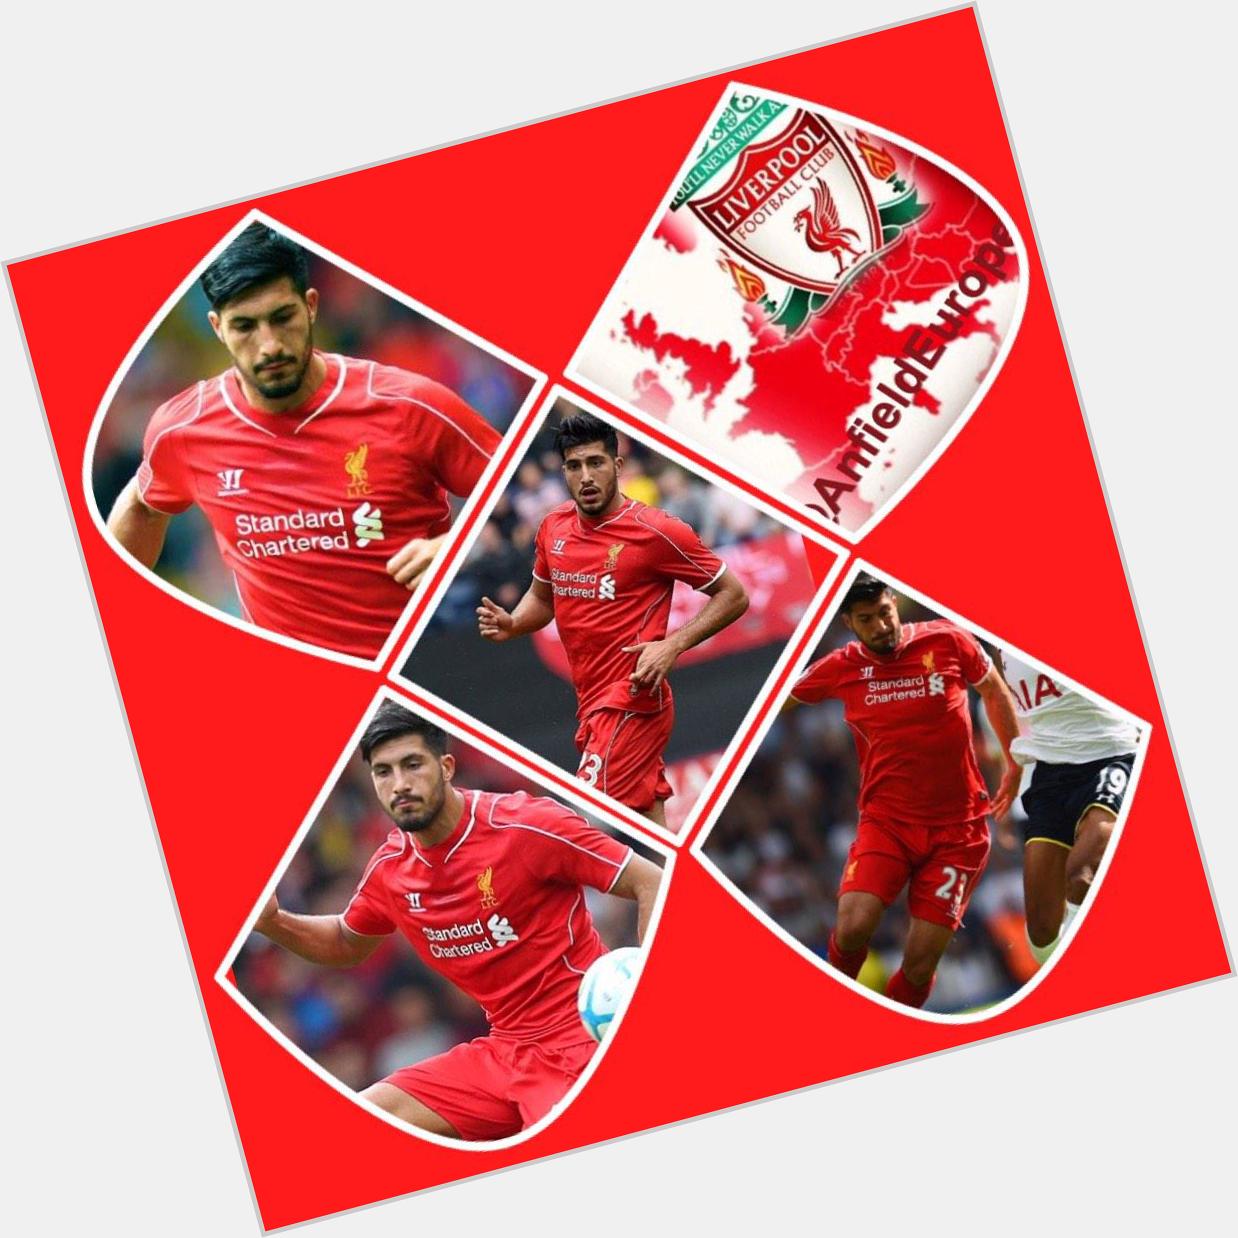 Emre Can. 21 today. Happy birthday lad! Massive future ahead of you! 